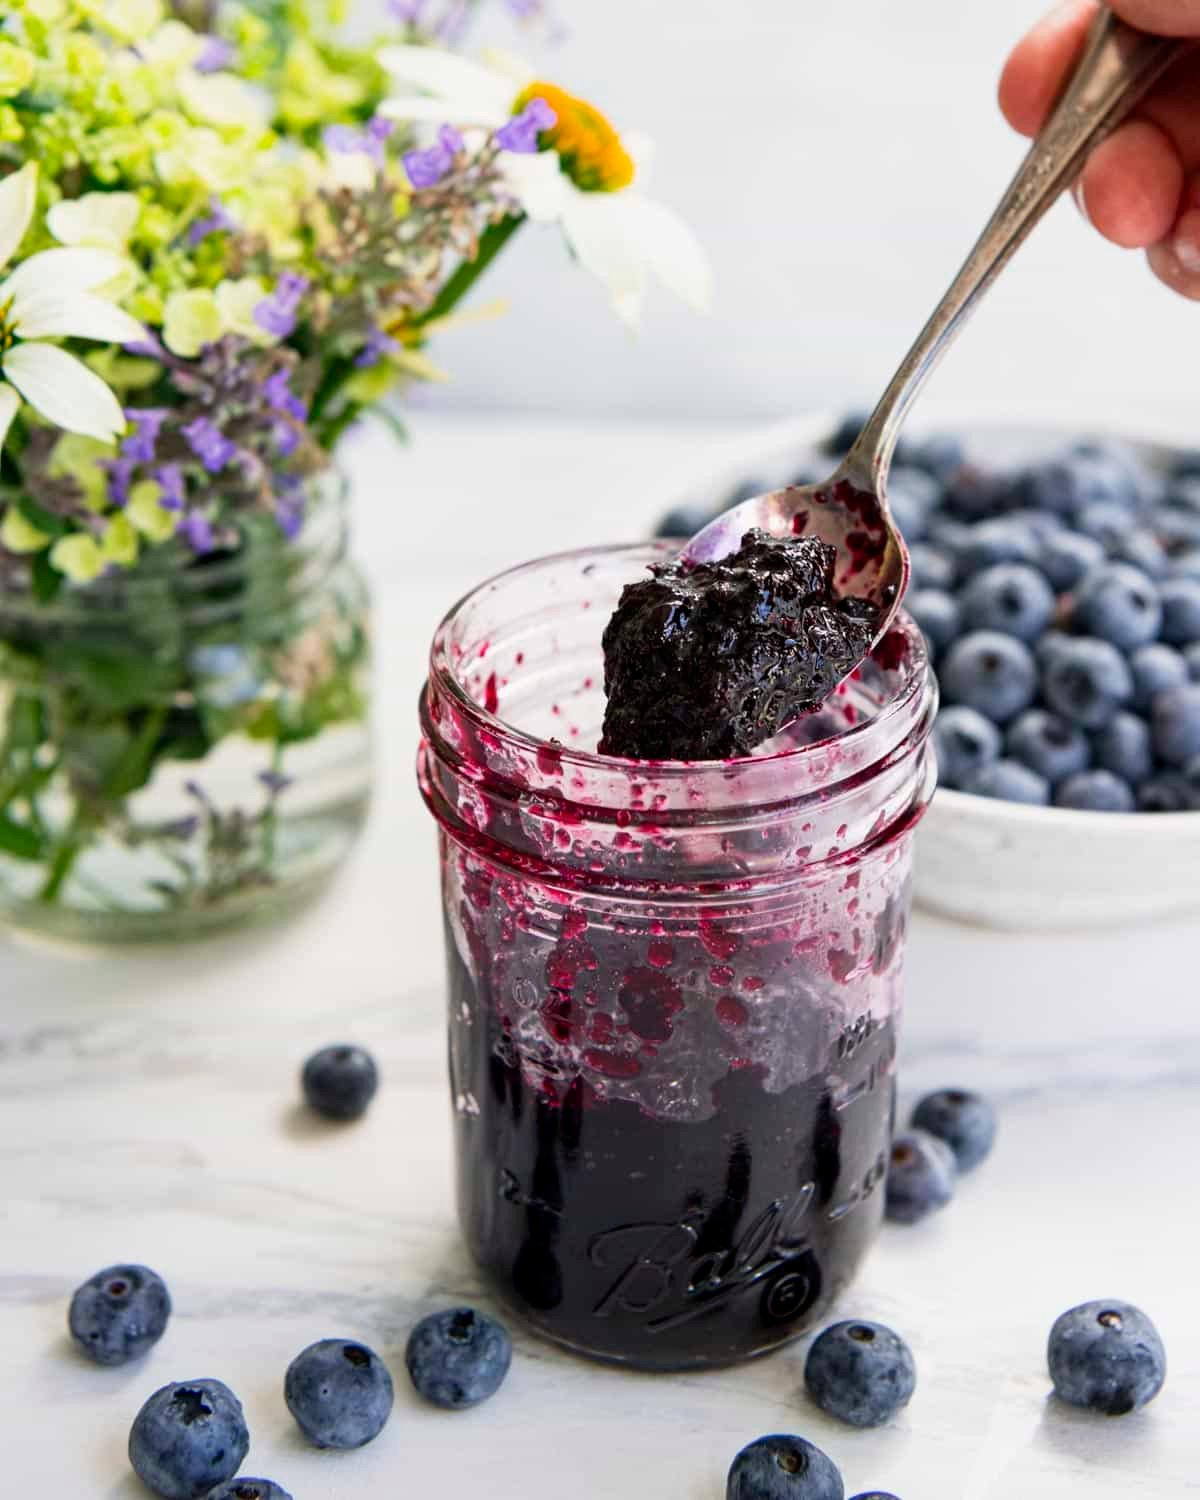 Hand serving homemade blueberry jam without pectin from a mason jar.